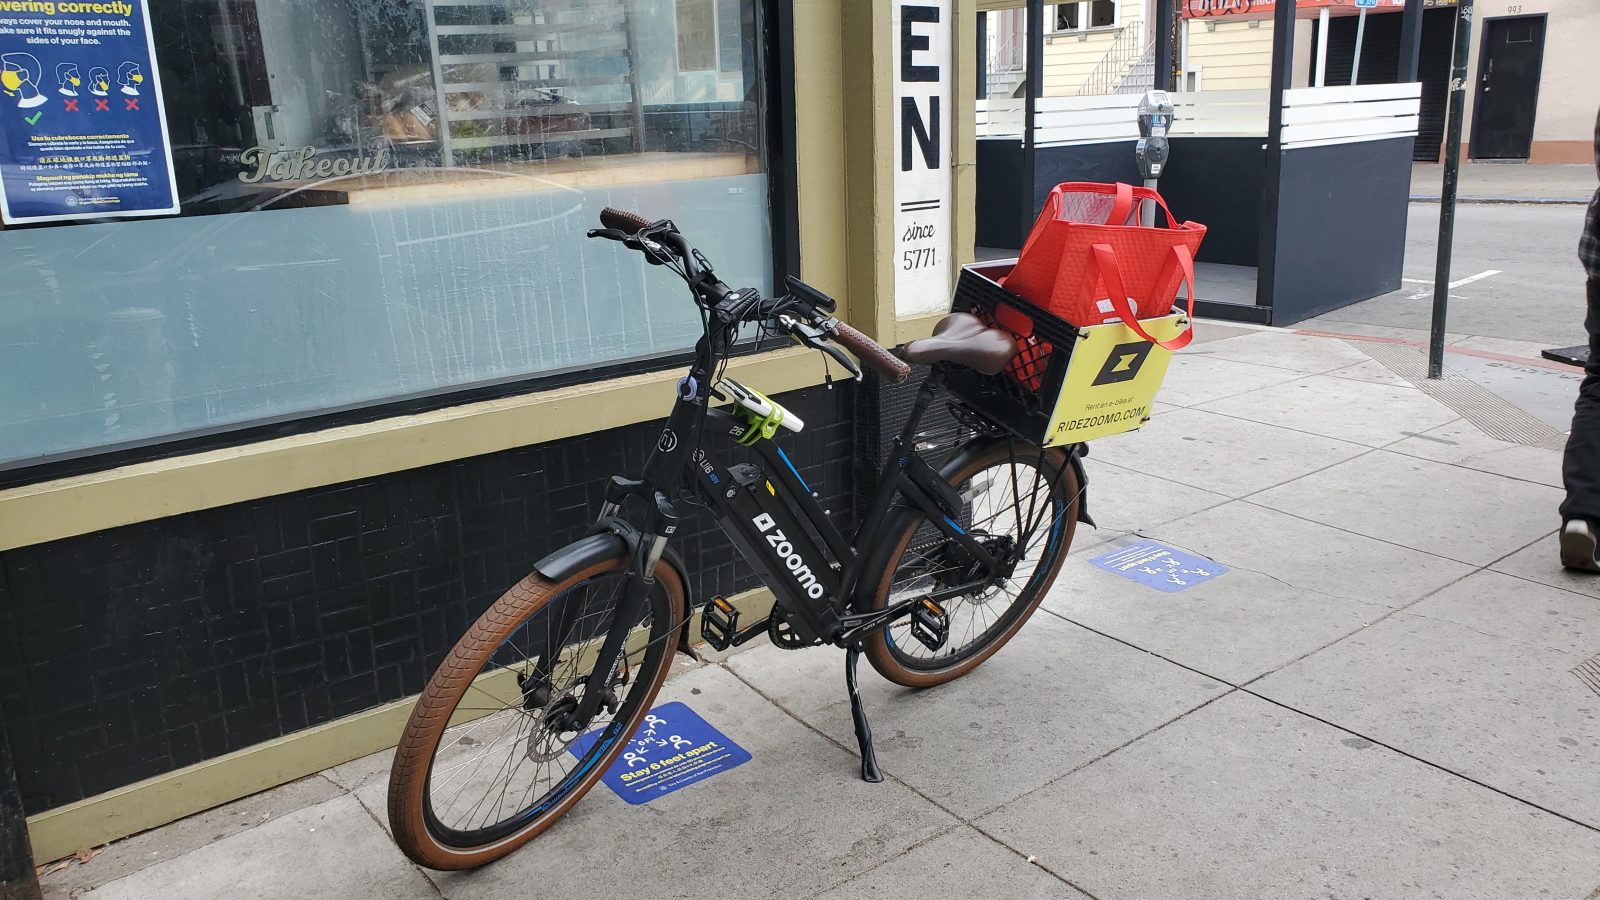 Zoomo e-bike parked in front of Wise Sons Delicatessen in the Mission District, San Francisco, California.